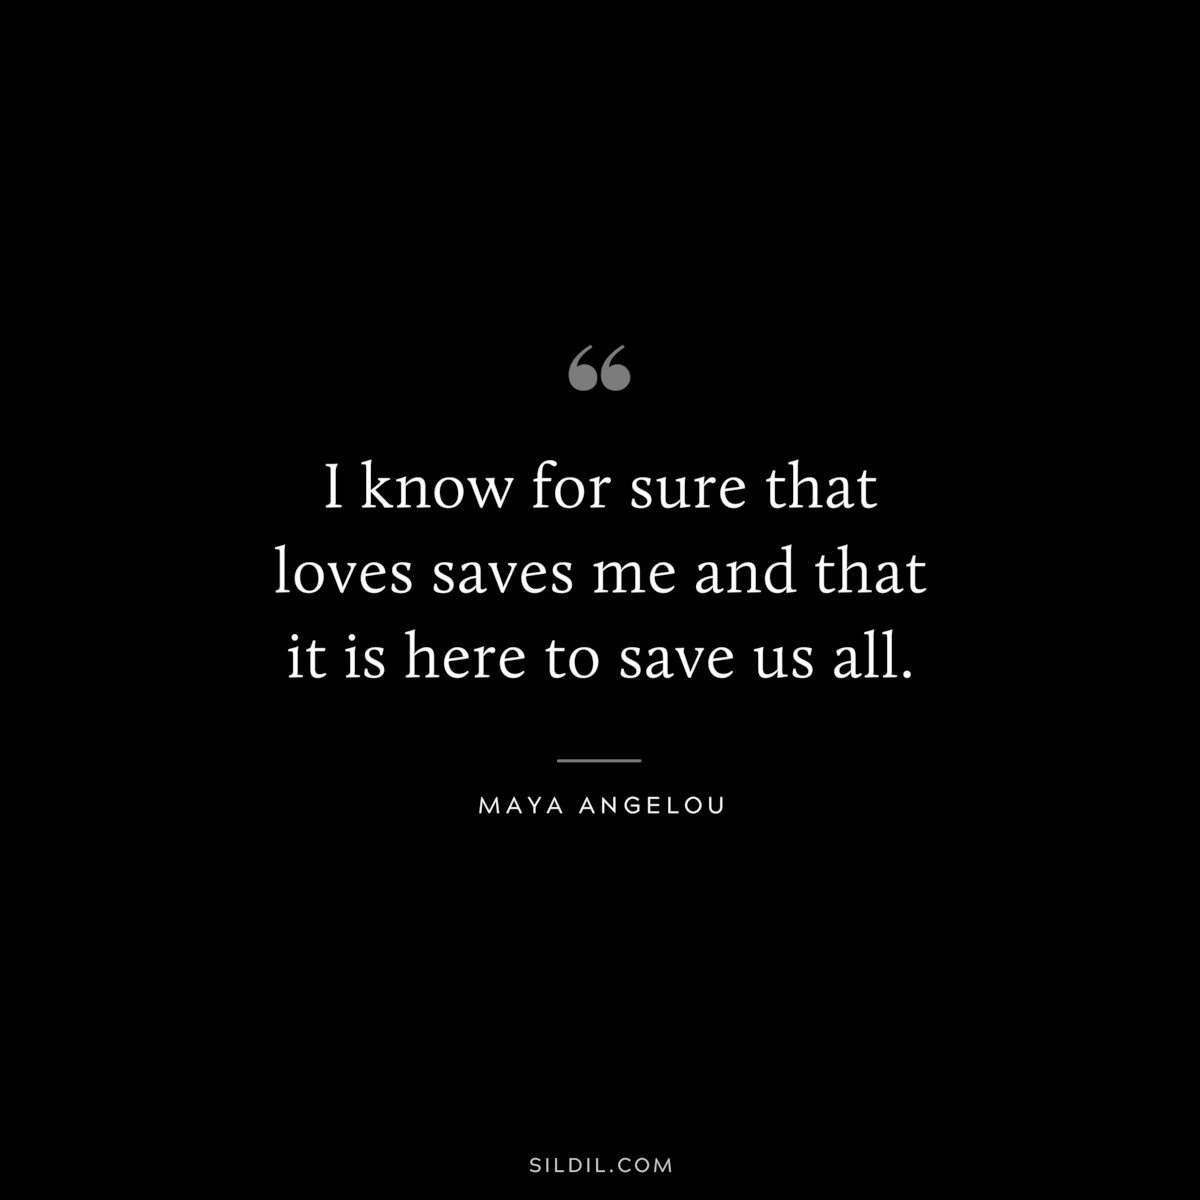 I know for sure that loves saves me and that it is here to save us all. ― Maya Angelou